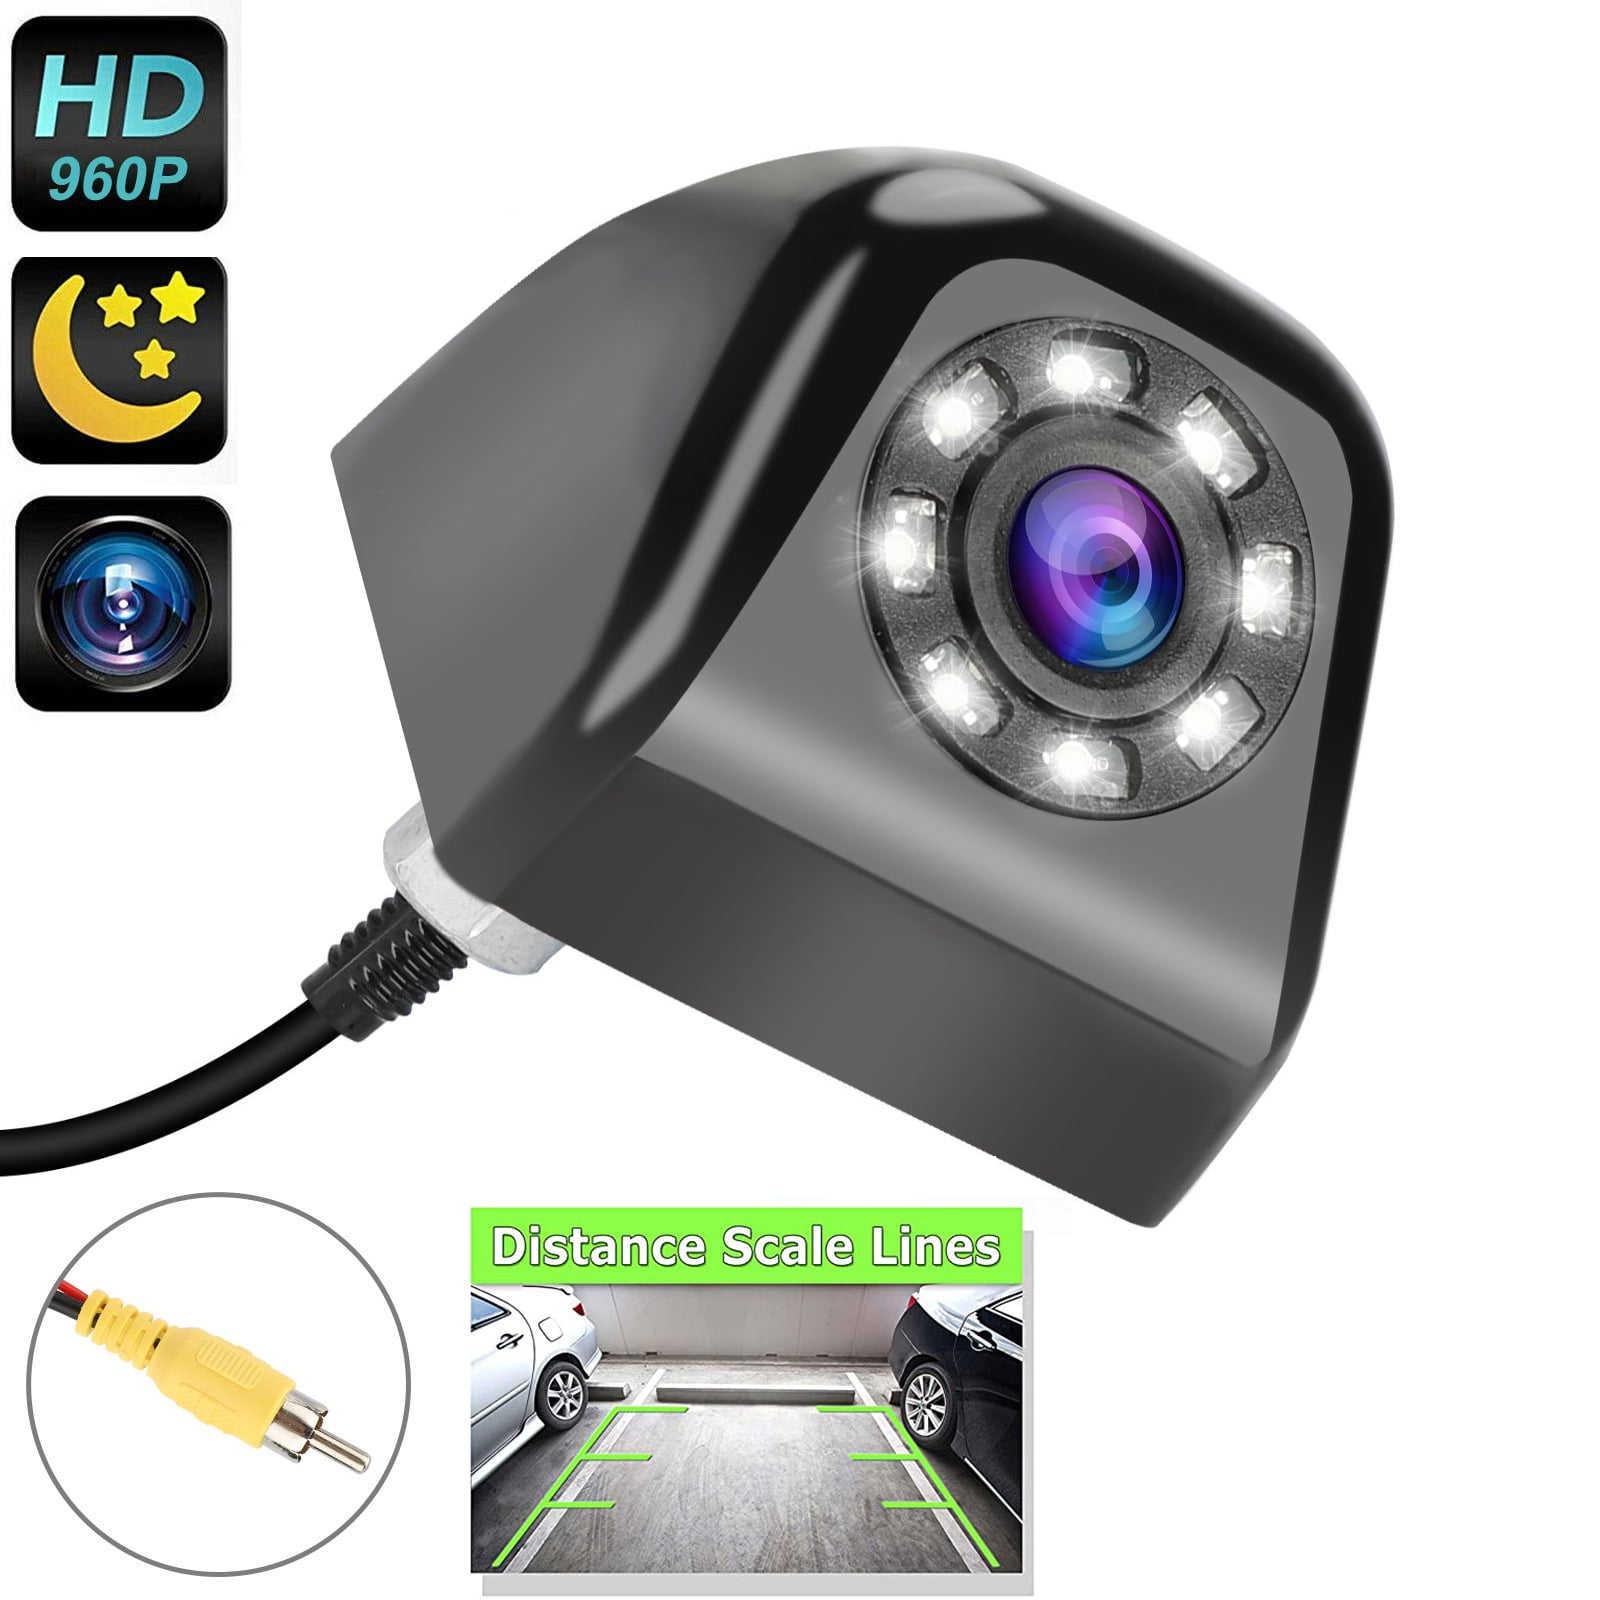 iStrong Backup Camera Wireless 5 Monitor Kit for Car/SUV/Minivan Waterproof License Plate Rear View Camera with 6 White LED Night Vision Guide Lines ON/Off 